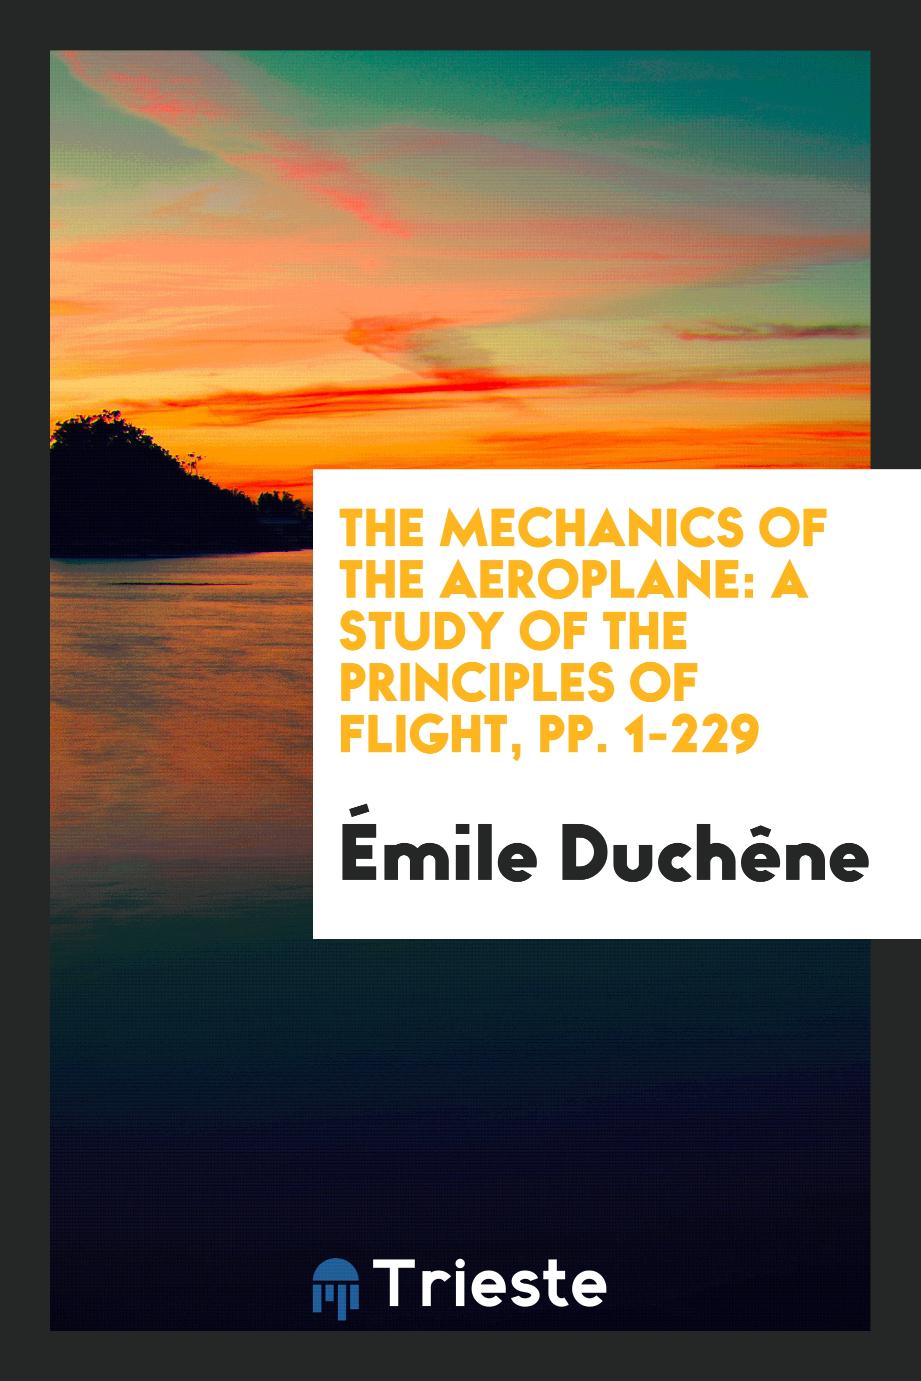 The Mechanics of the Aeroplane: A Study of the Principles of Flight, pp. 1-229